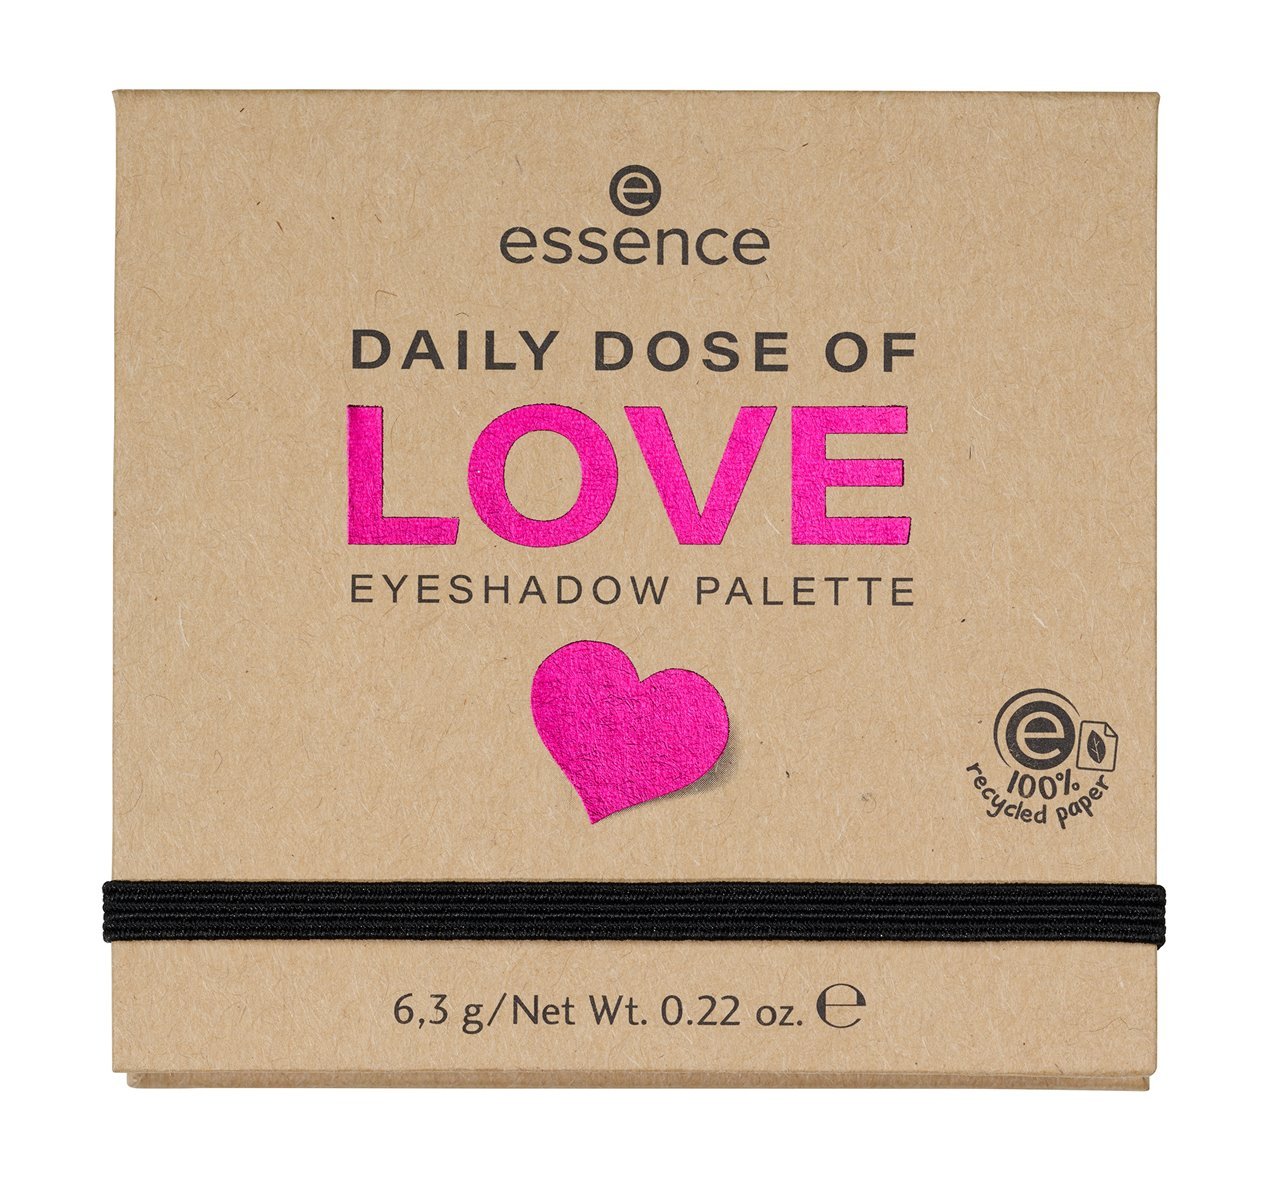 Essence Daily Dose of Love Eyeshadow Palette - AllurebeautypkEssence Daily Dose of Love Eyeshadow Palette